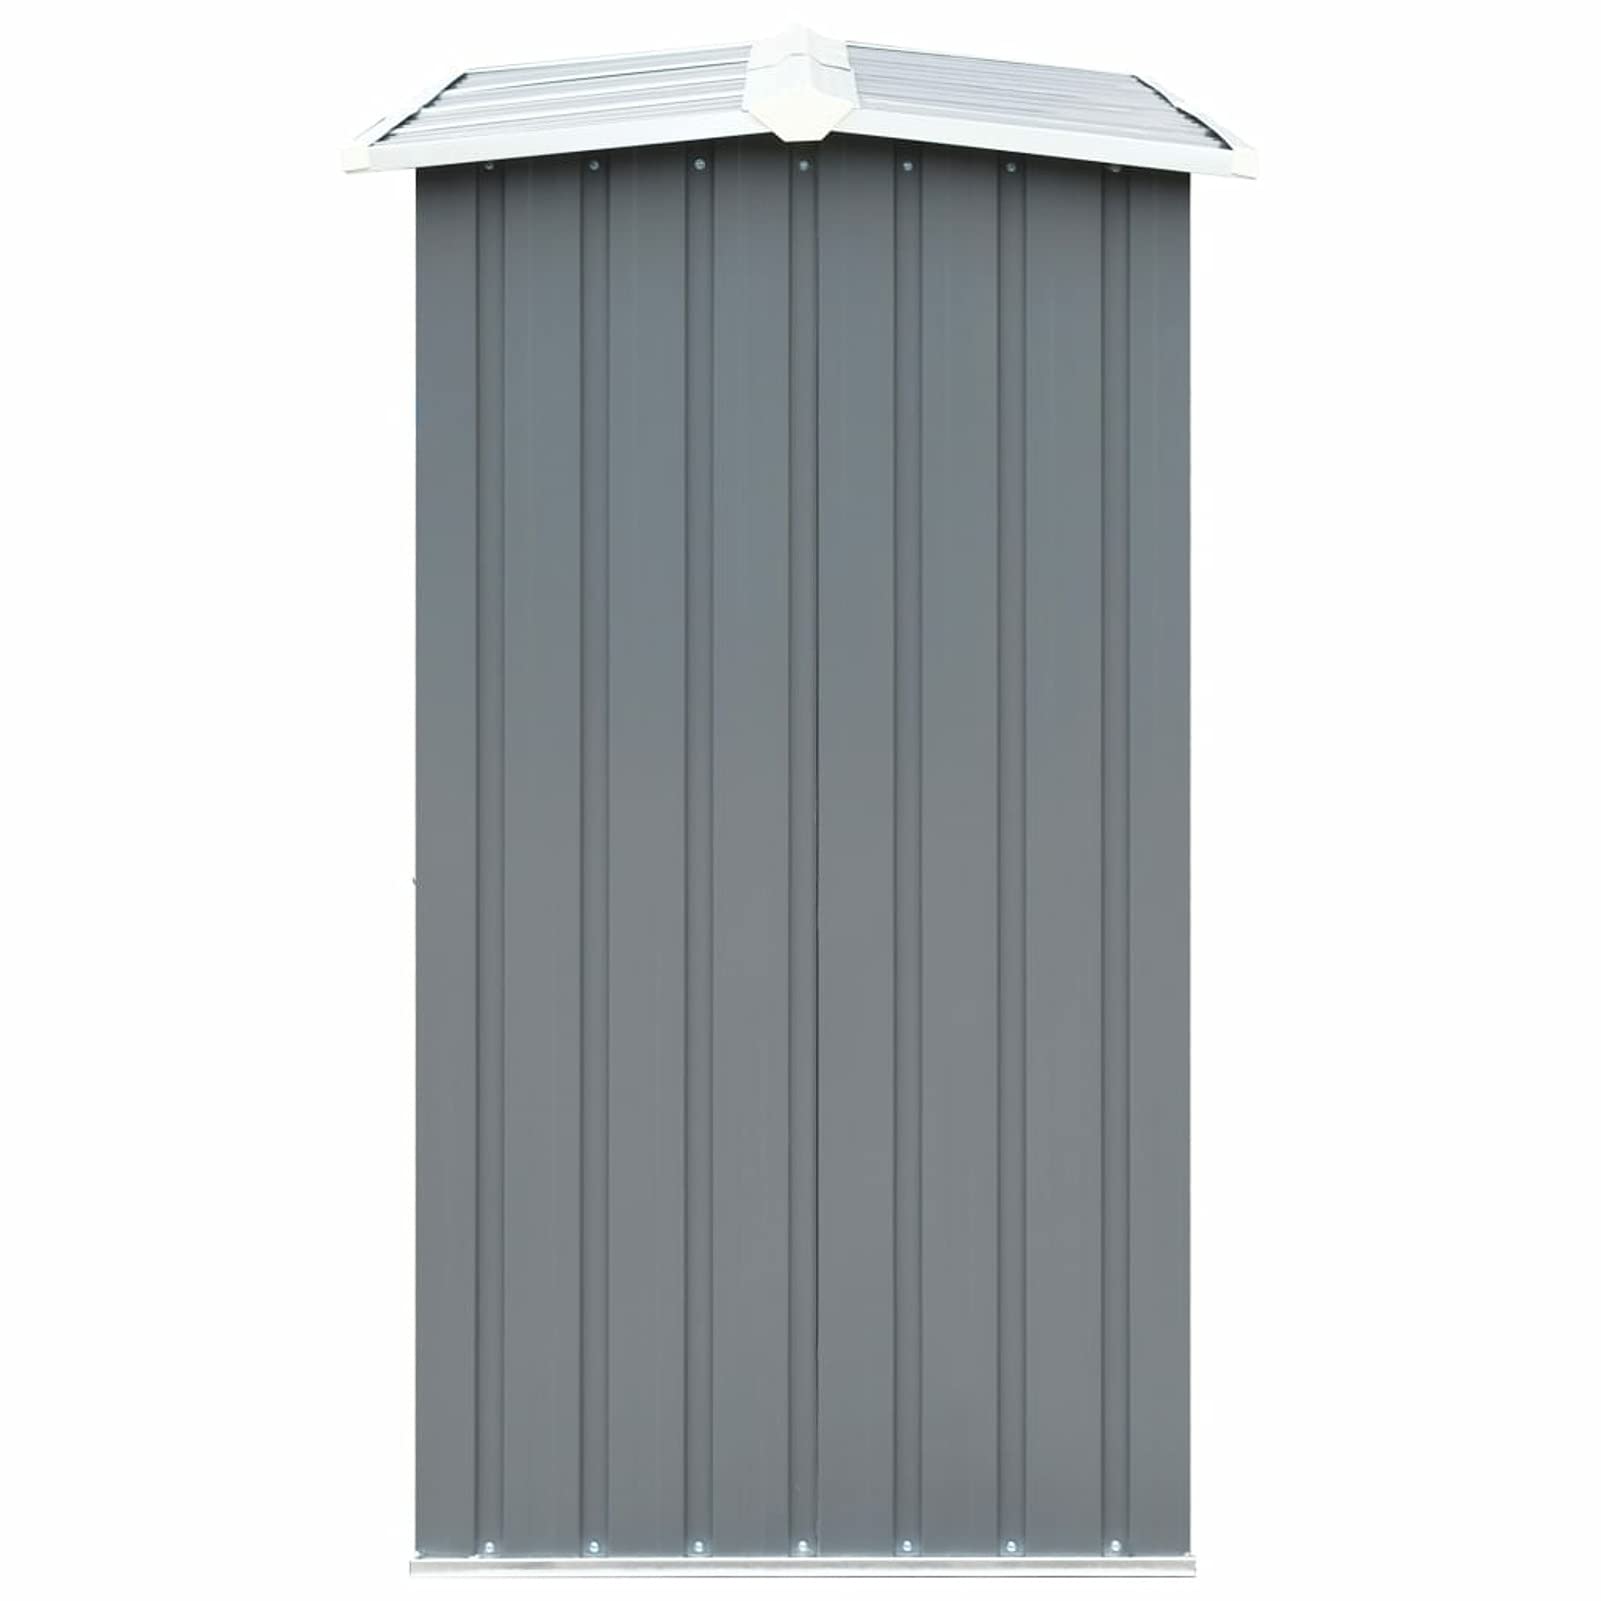 Gecheer Garden Log Storage Shed Galvanized Steel 67.7"x35.8"x60.6" Gray Strong and Practical